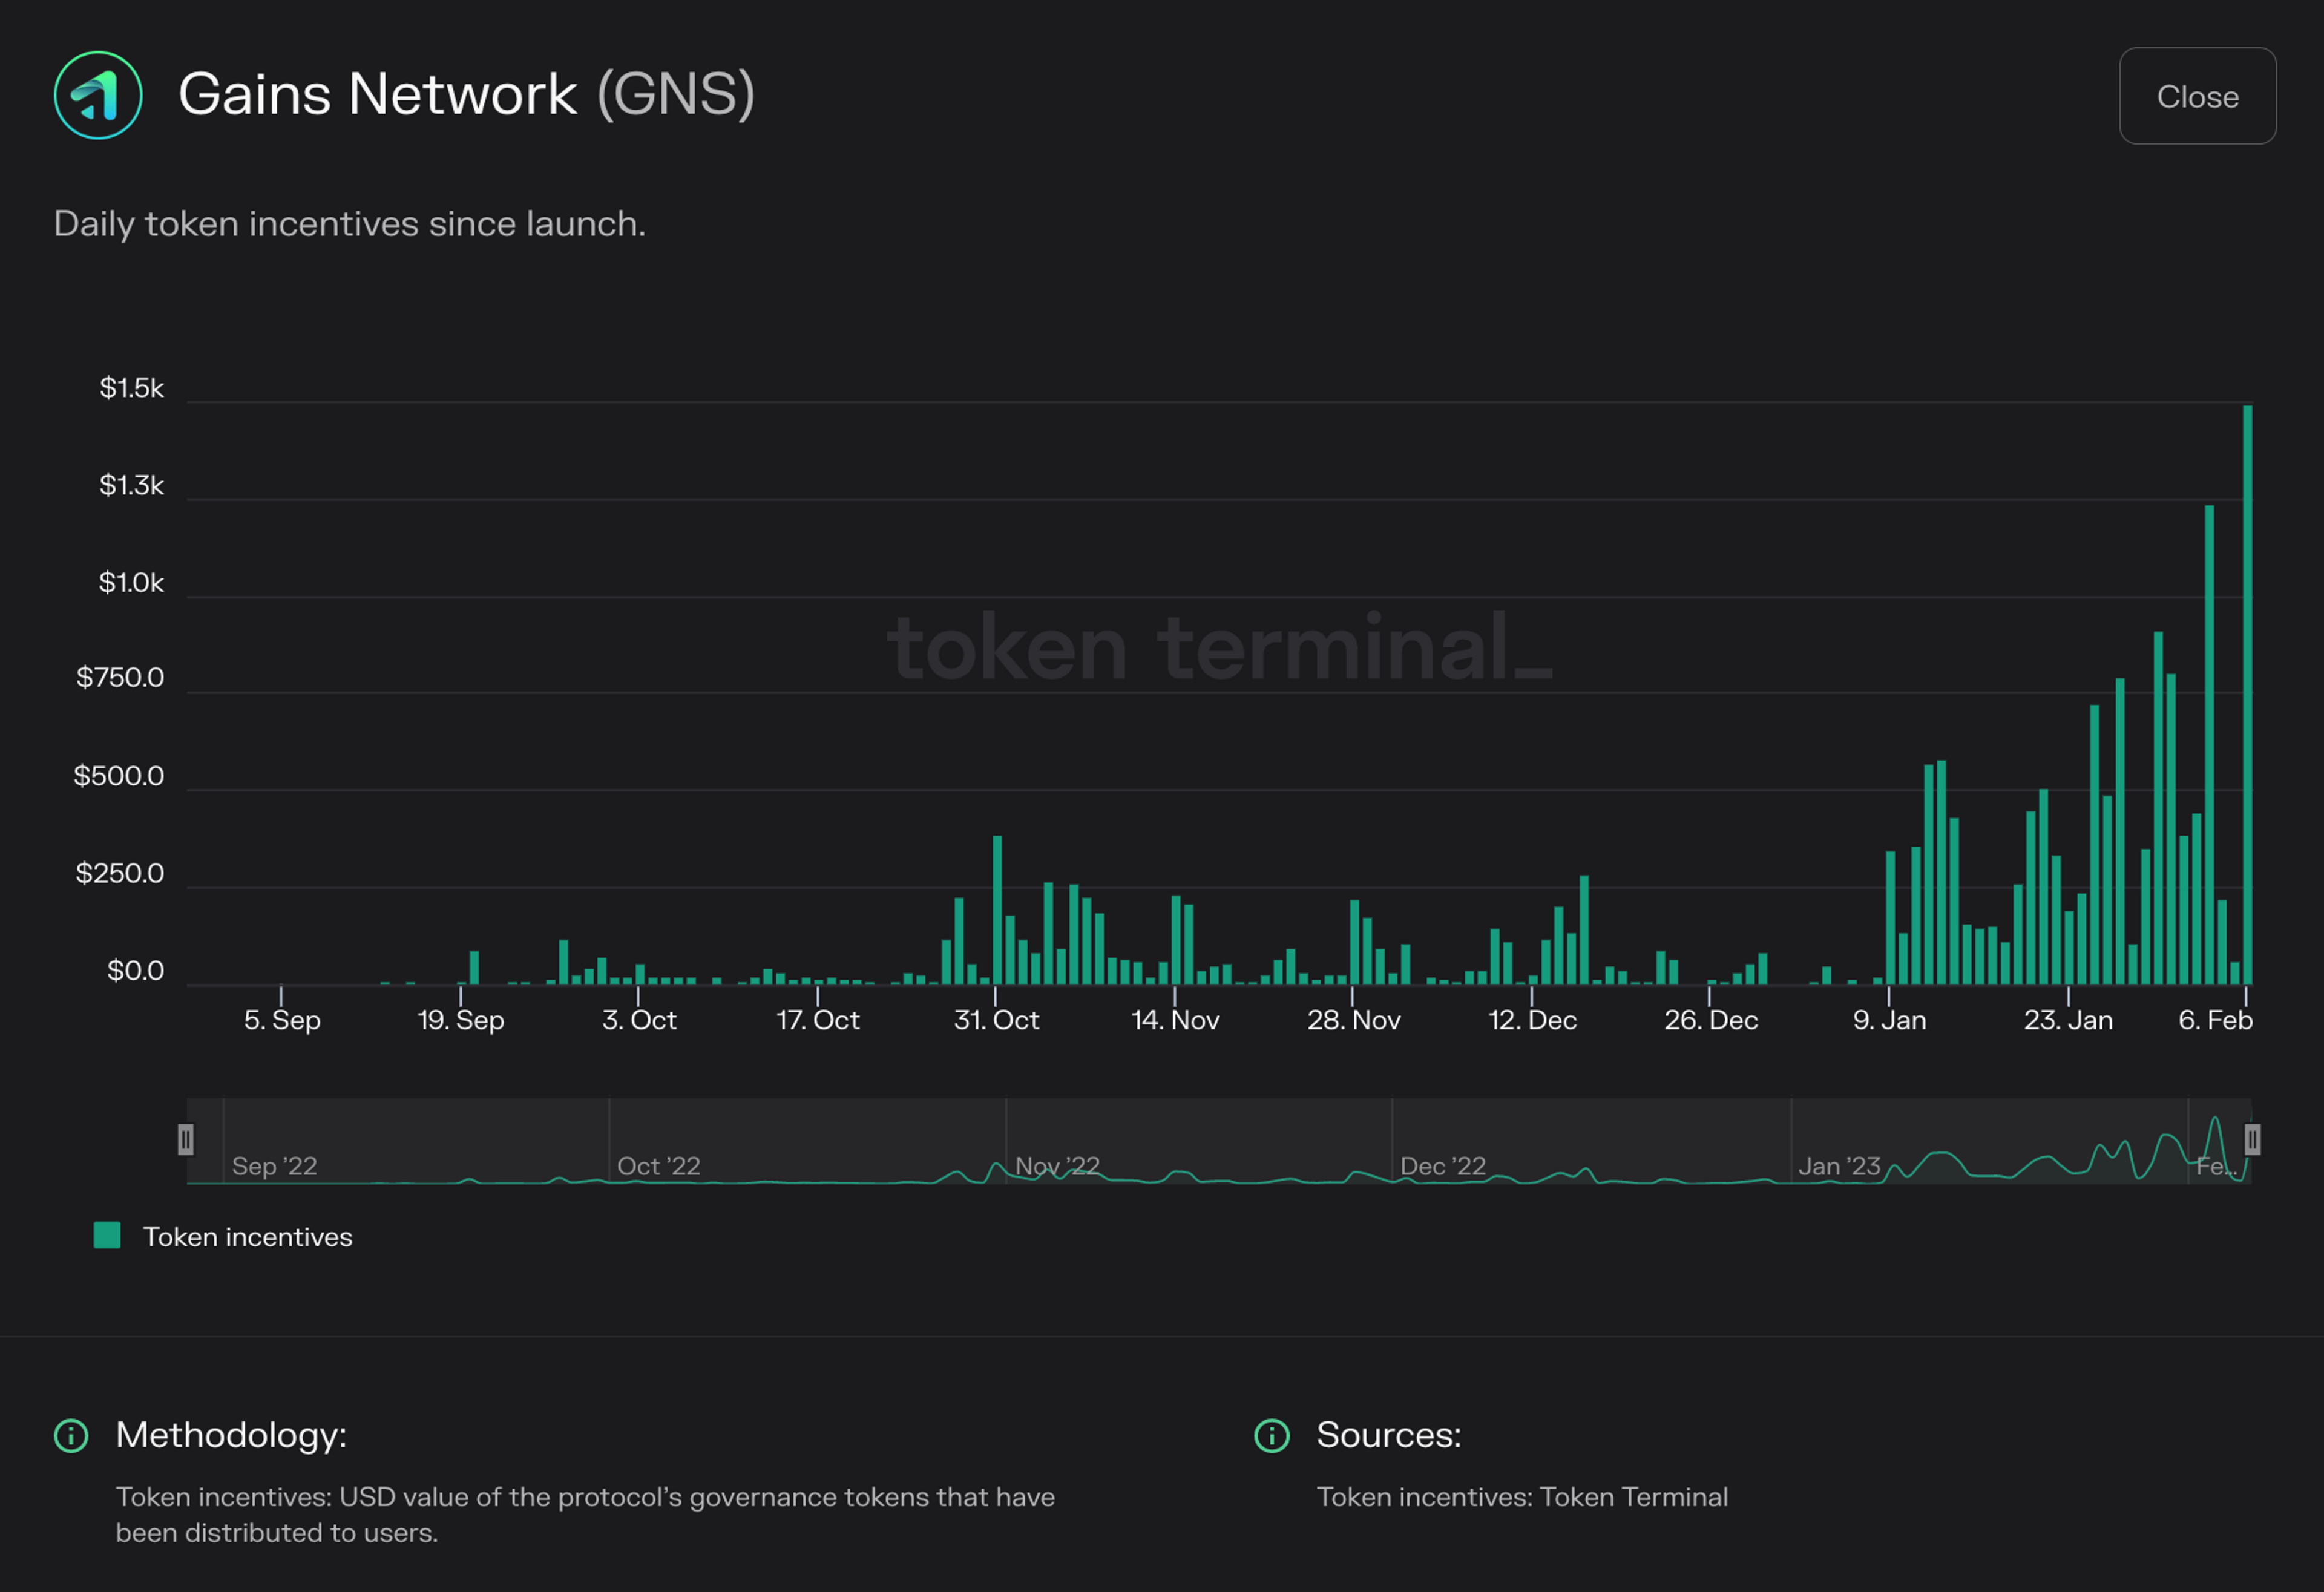 Chart of Gains Network token incentives